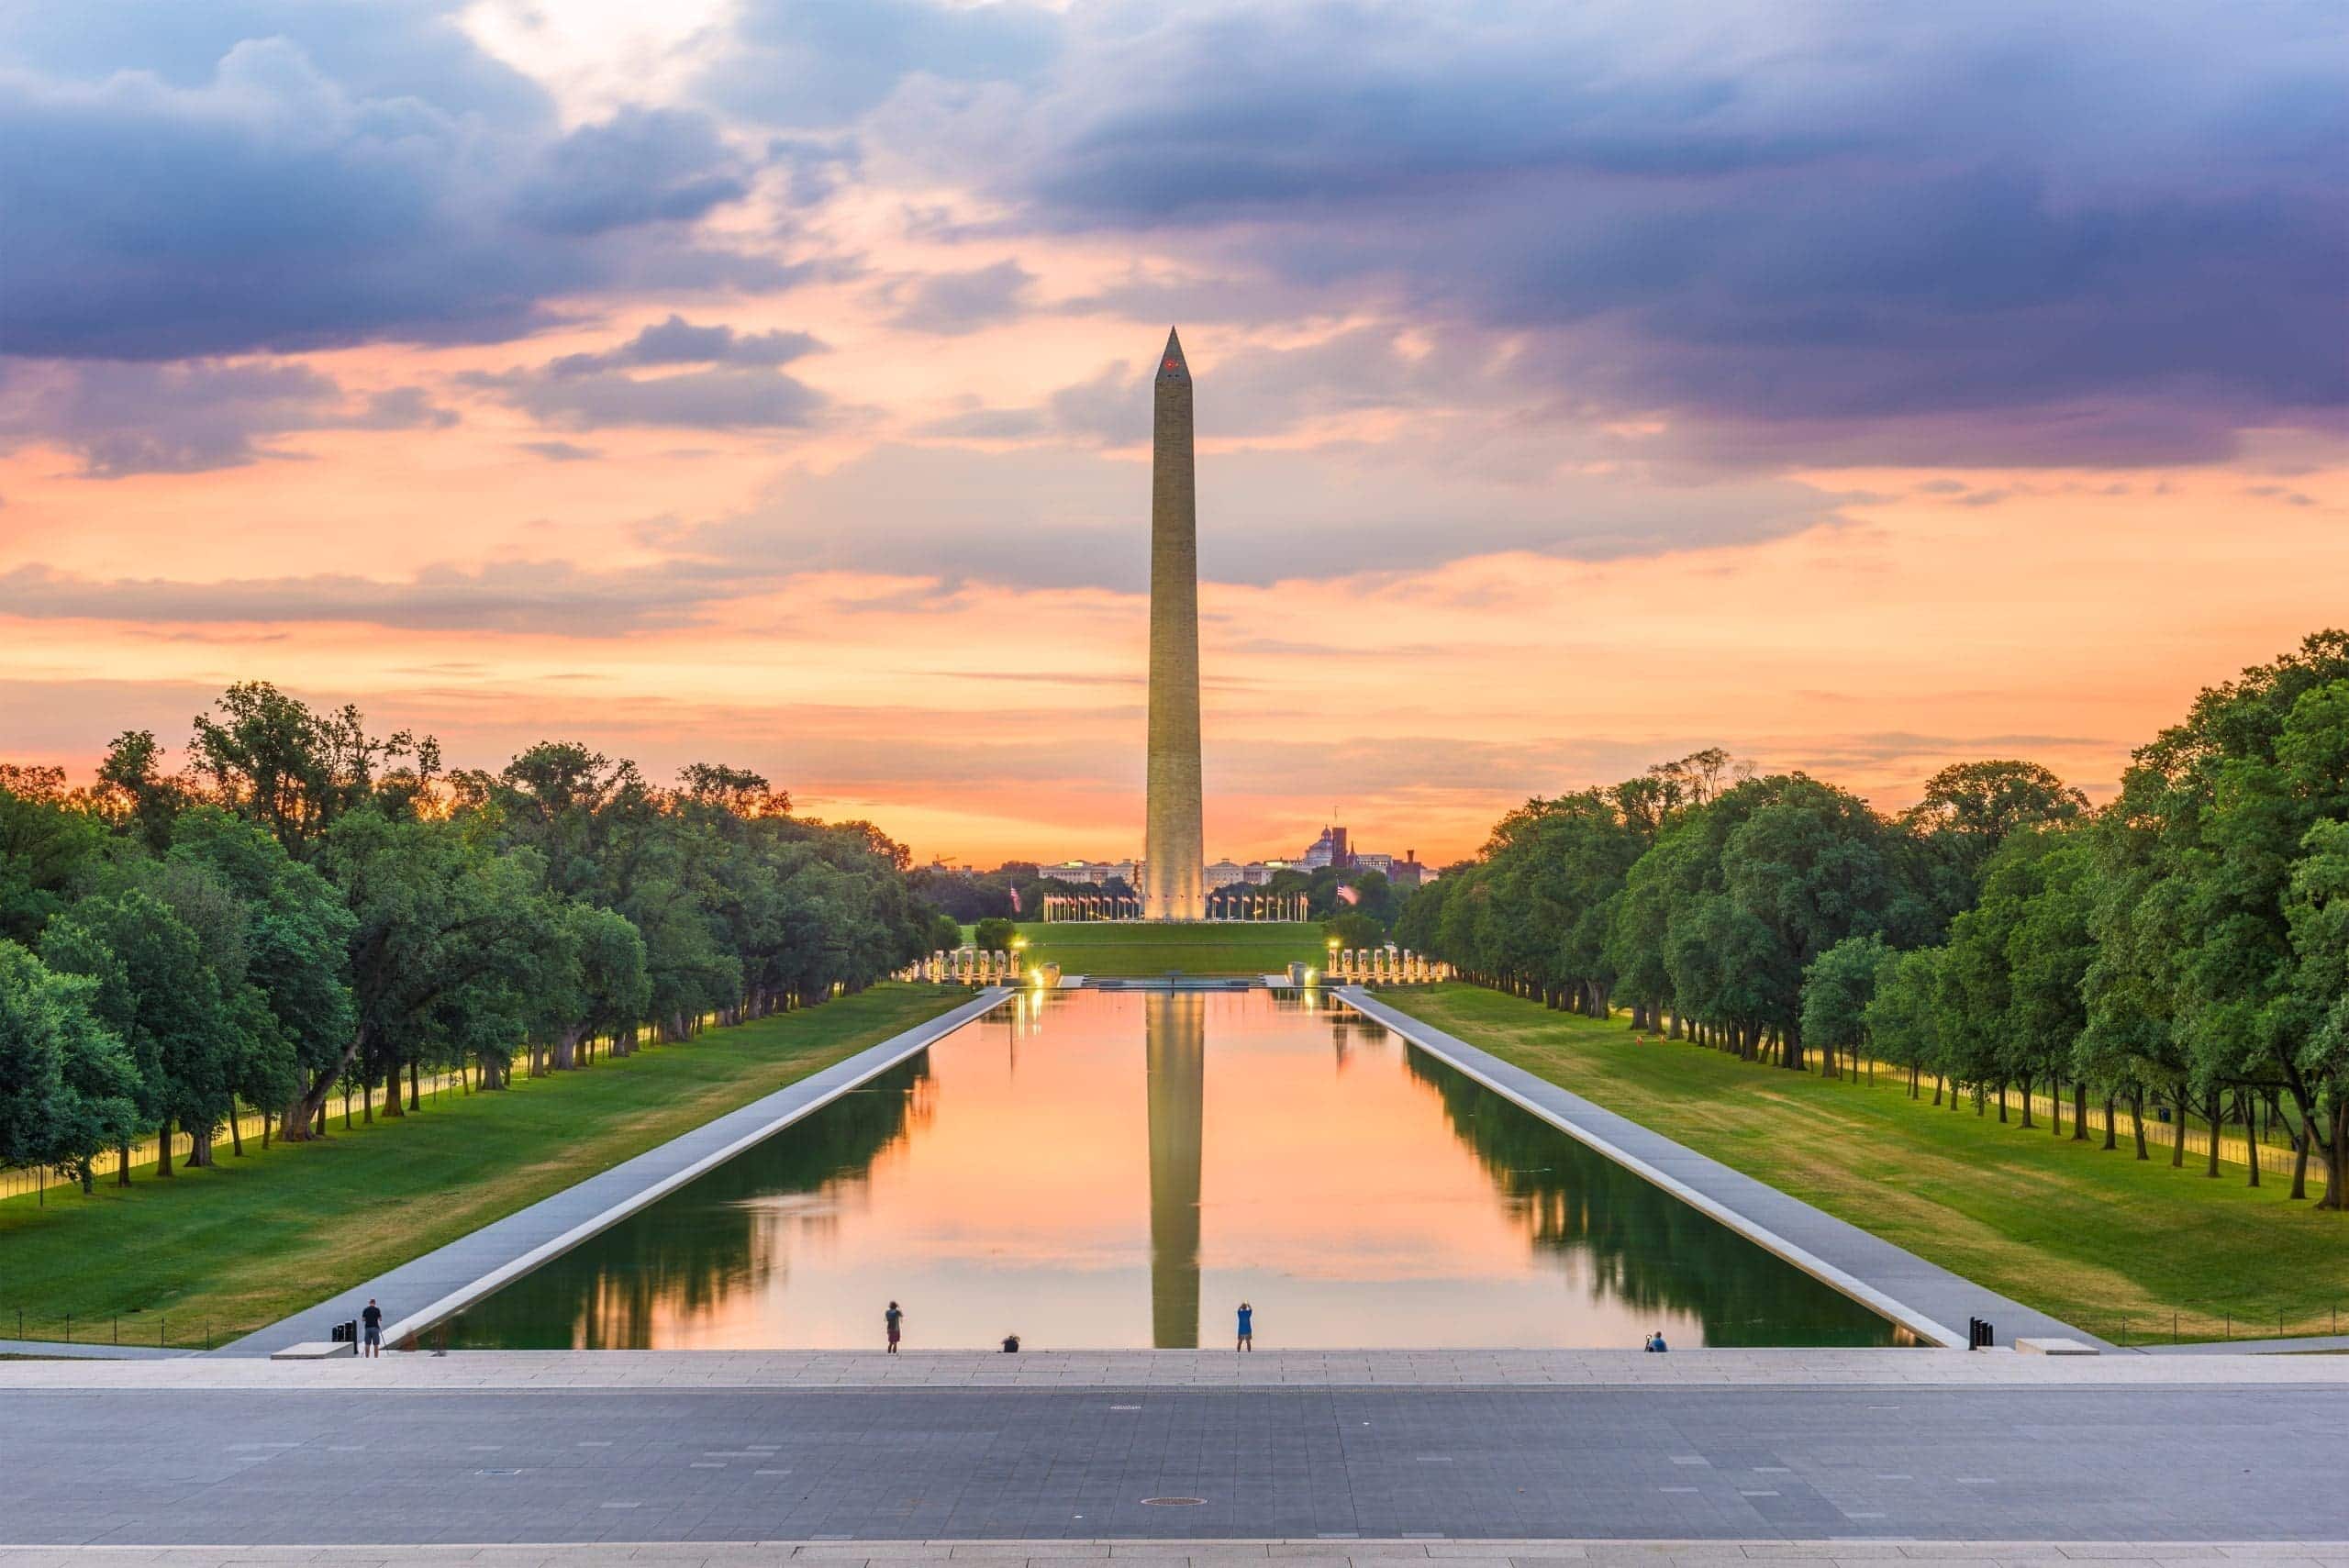 Are there tours of the Washington Monument?